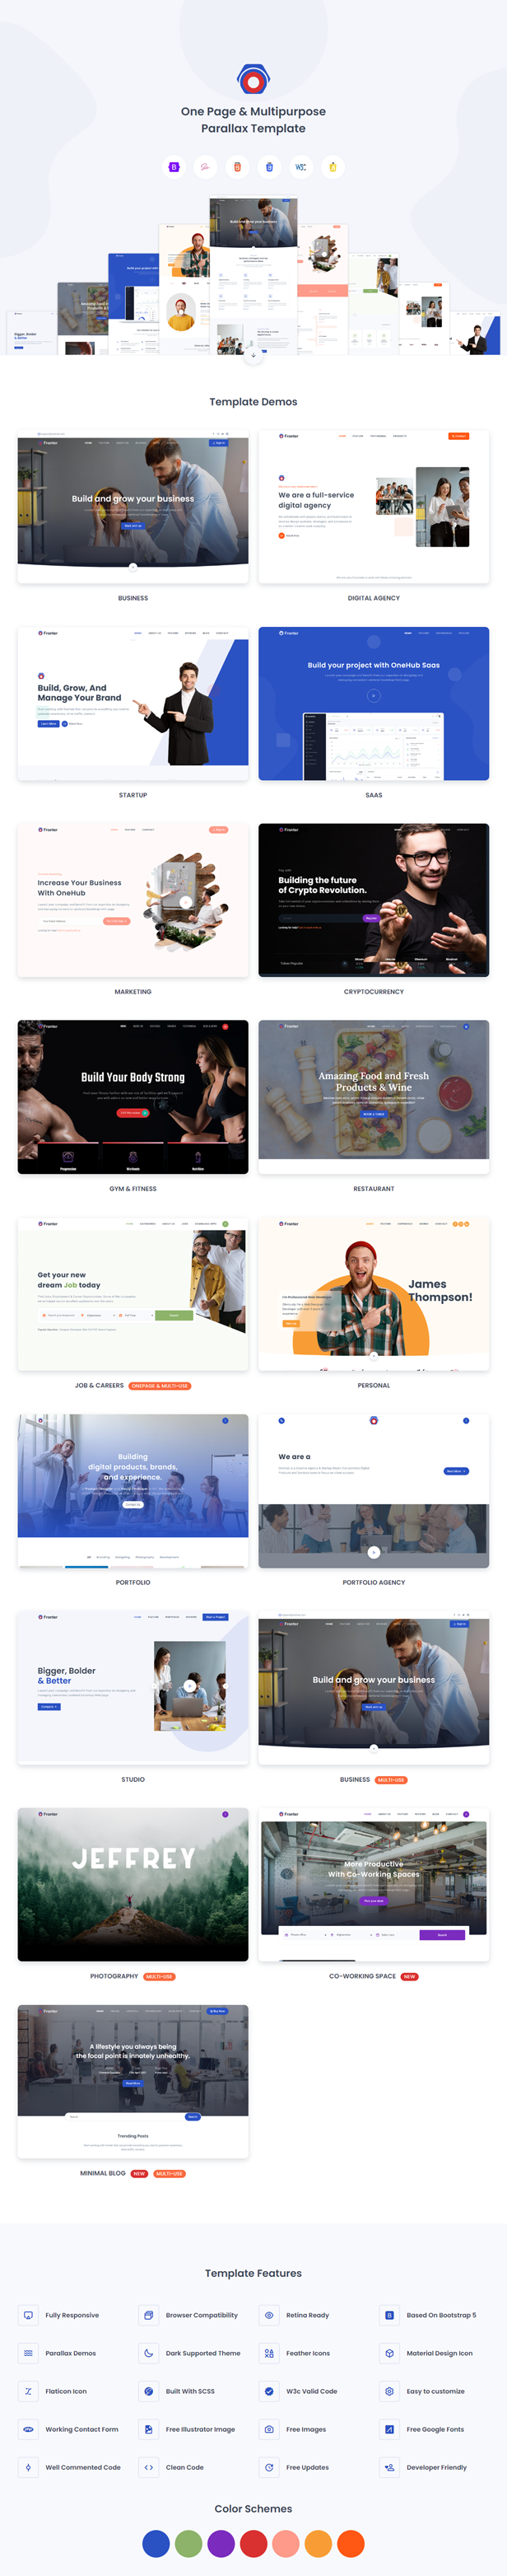 Fronter – One Page & Multipurpose Landing Page Template